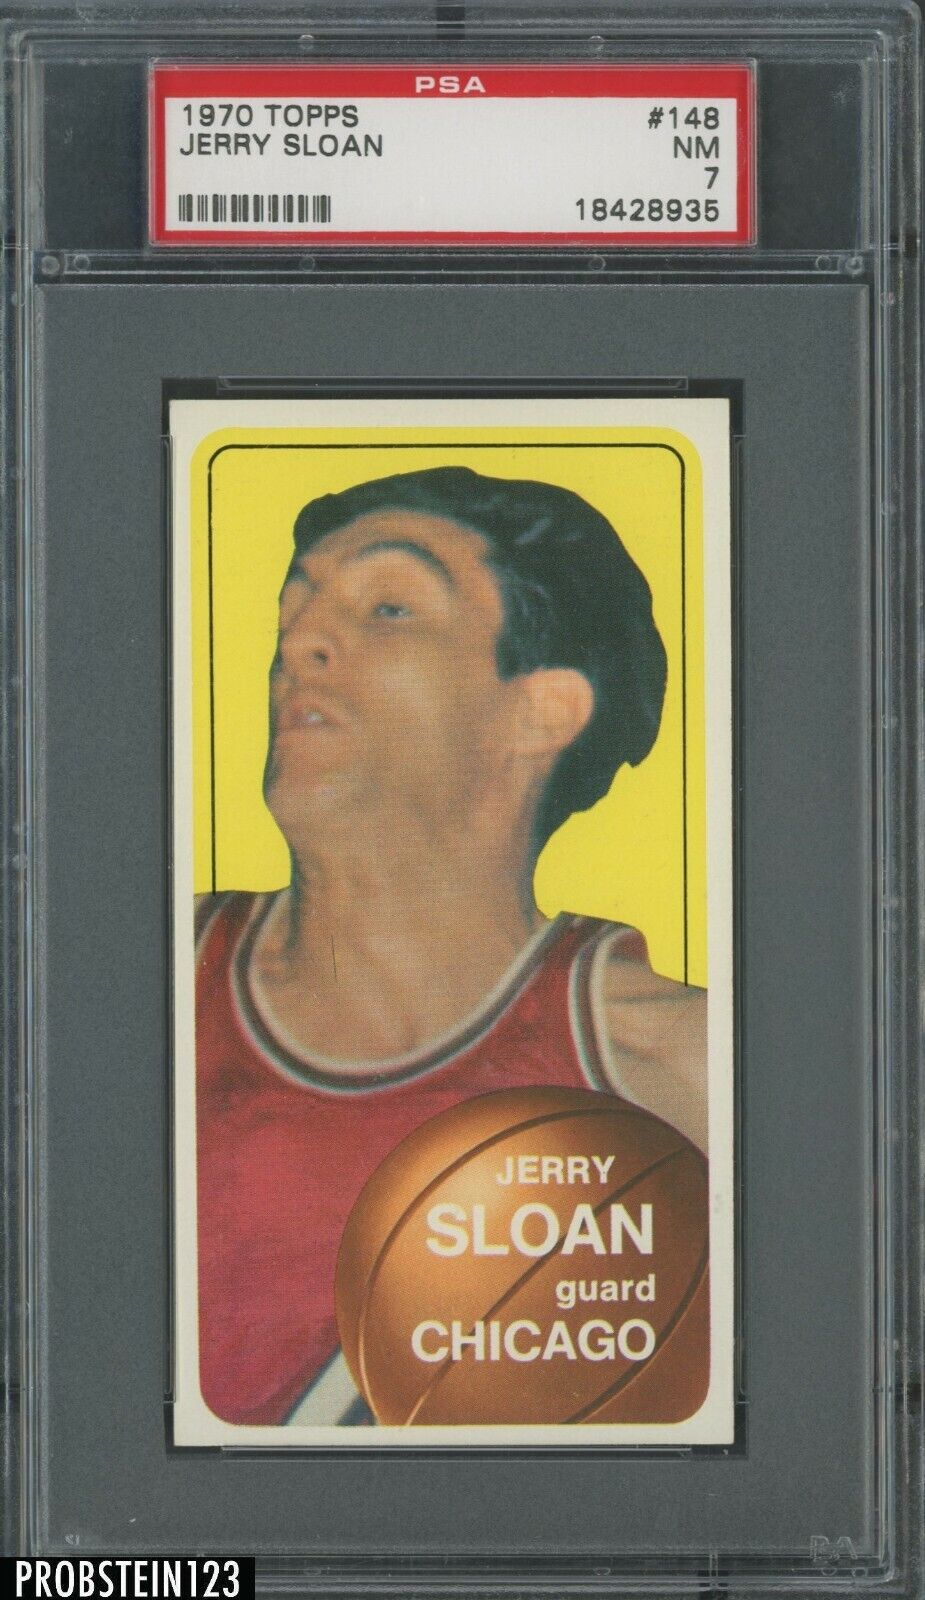 1970 Topps Basketball #148 Jerry Sloan Chicago PSA 7 NM